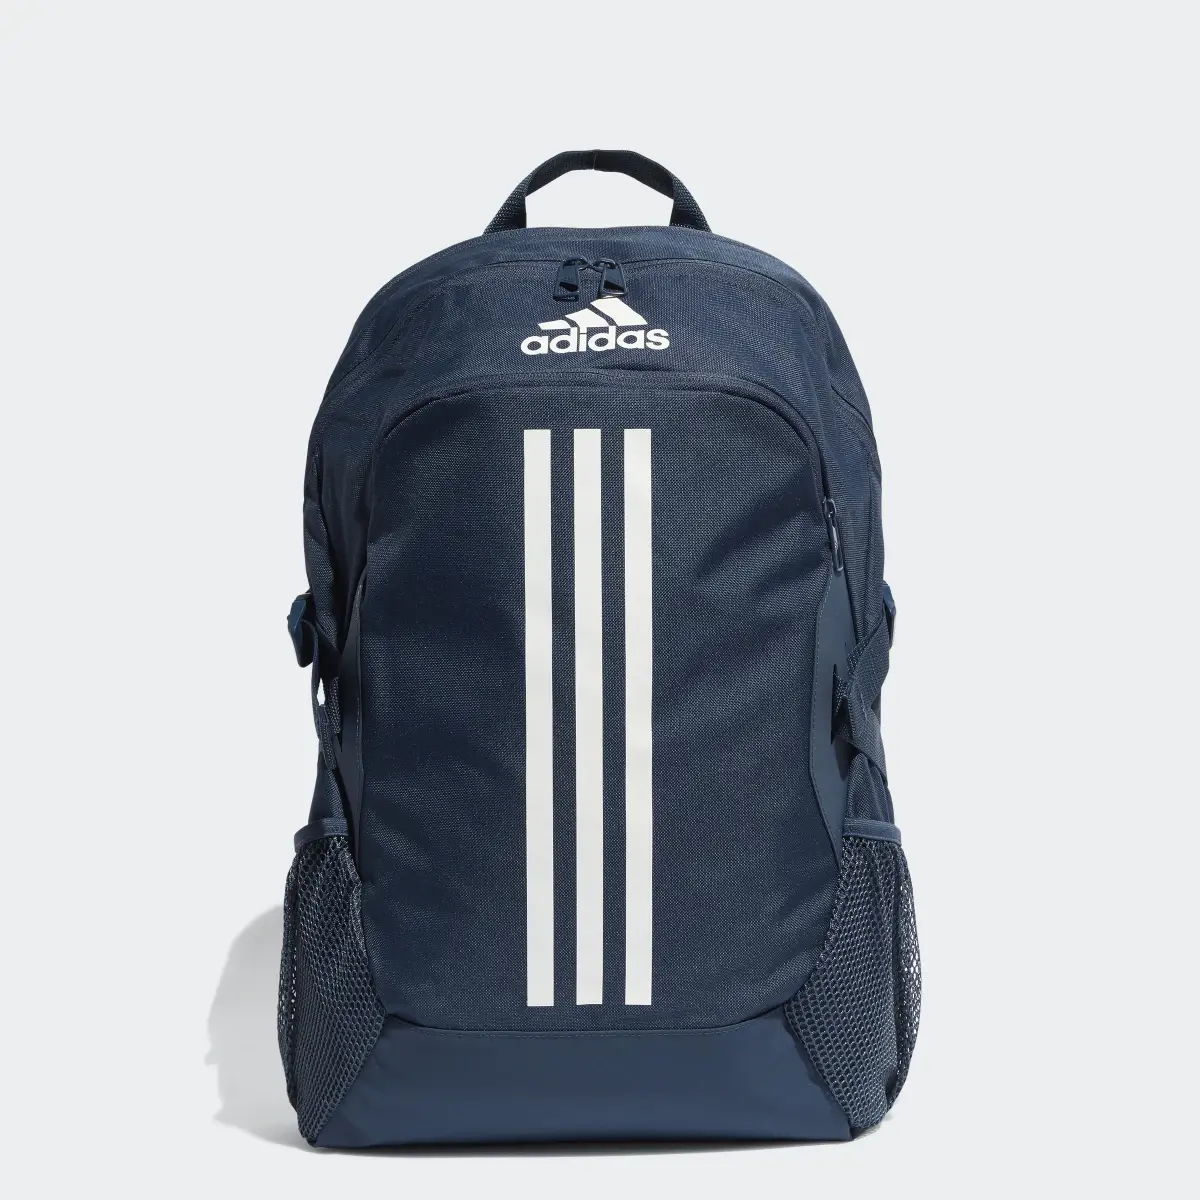 Adidas Power 5 Backpack. 1